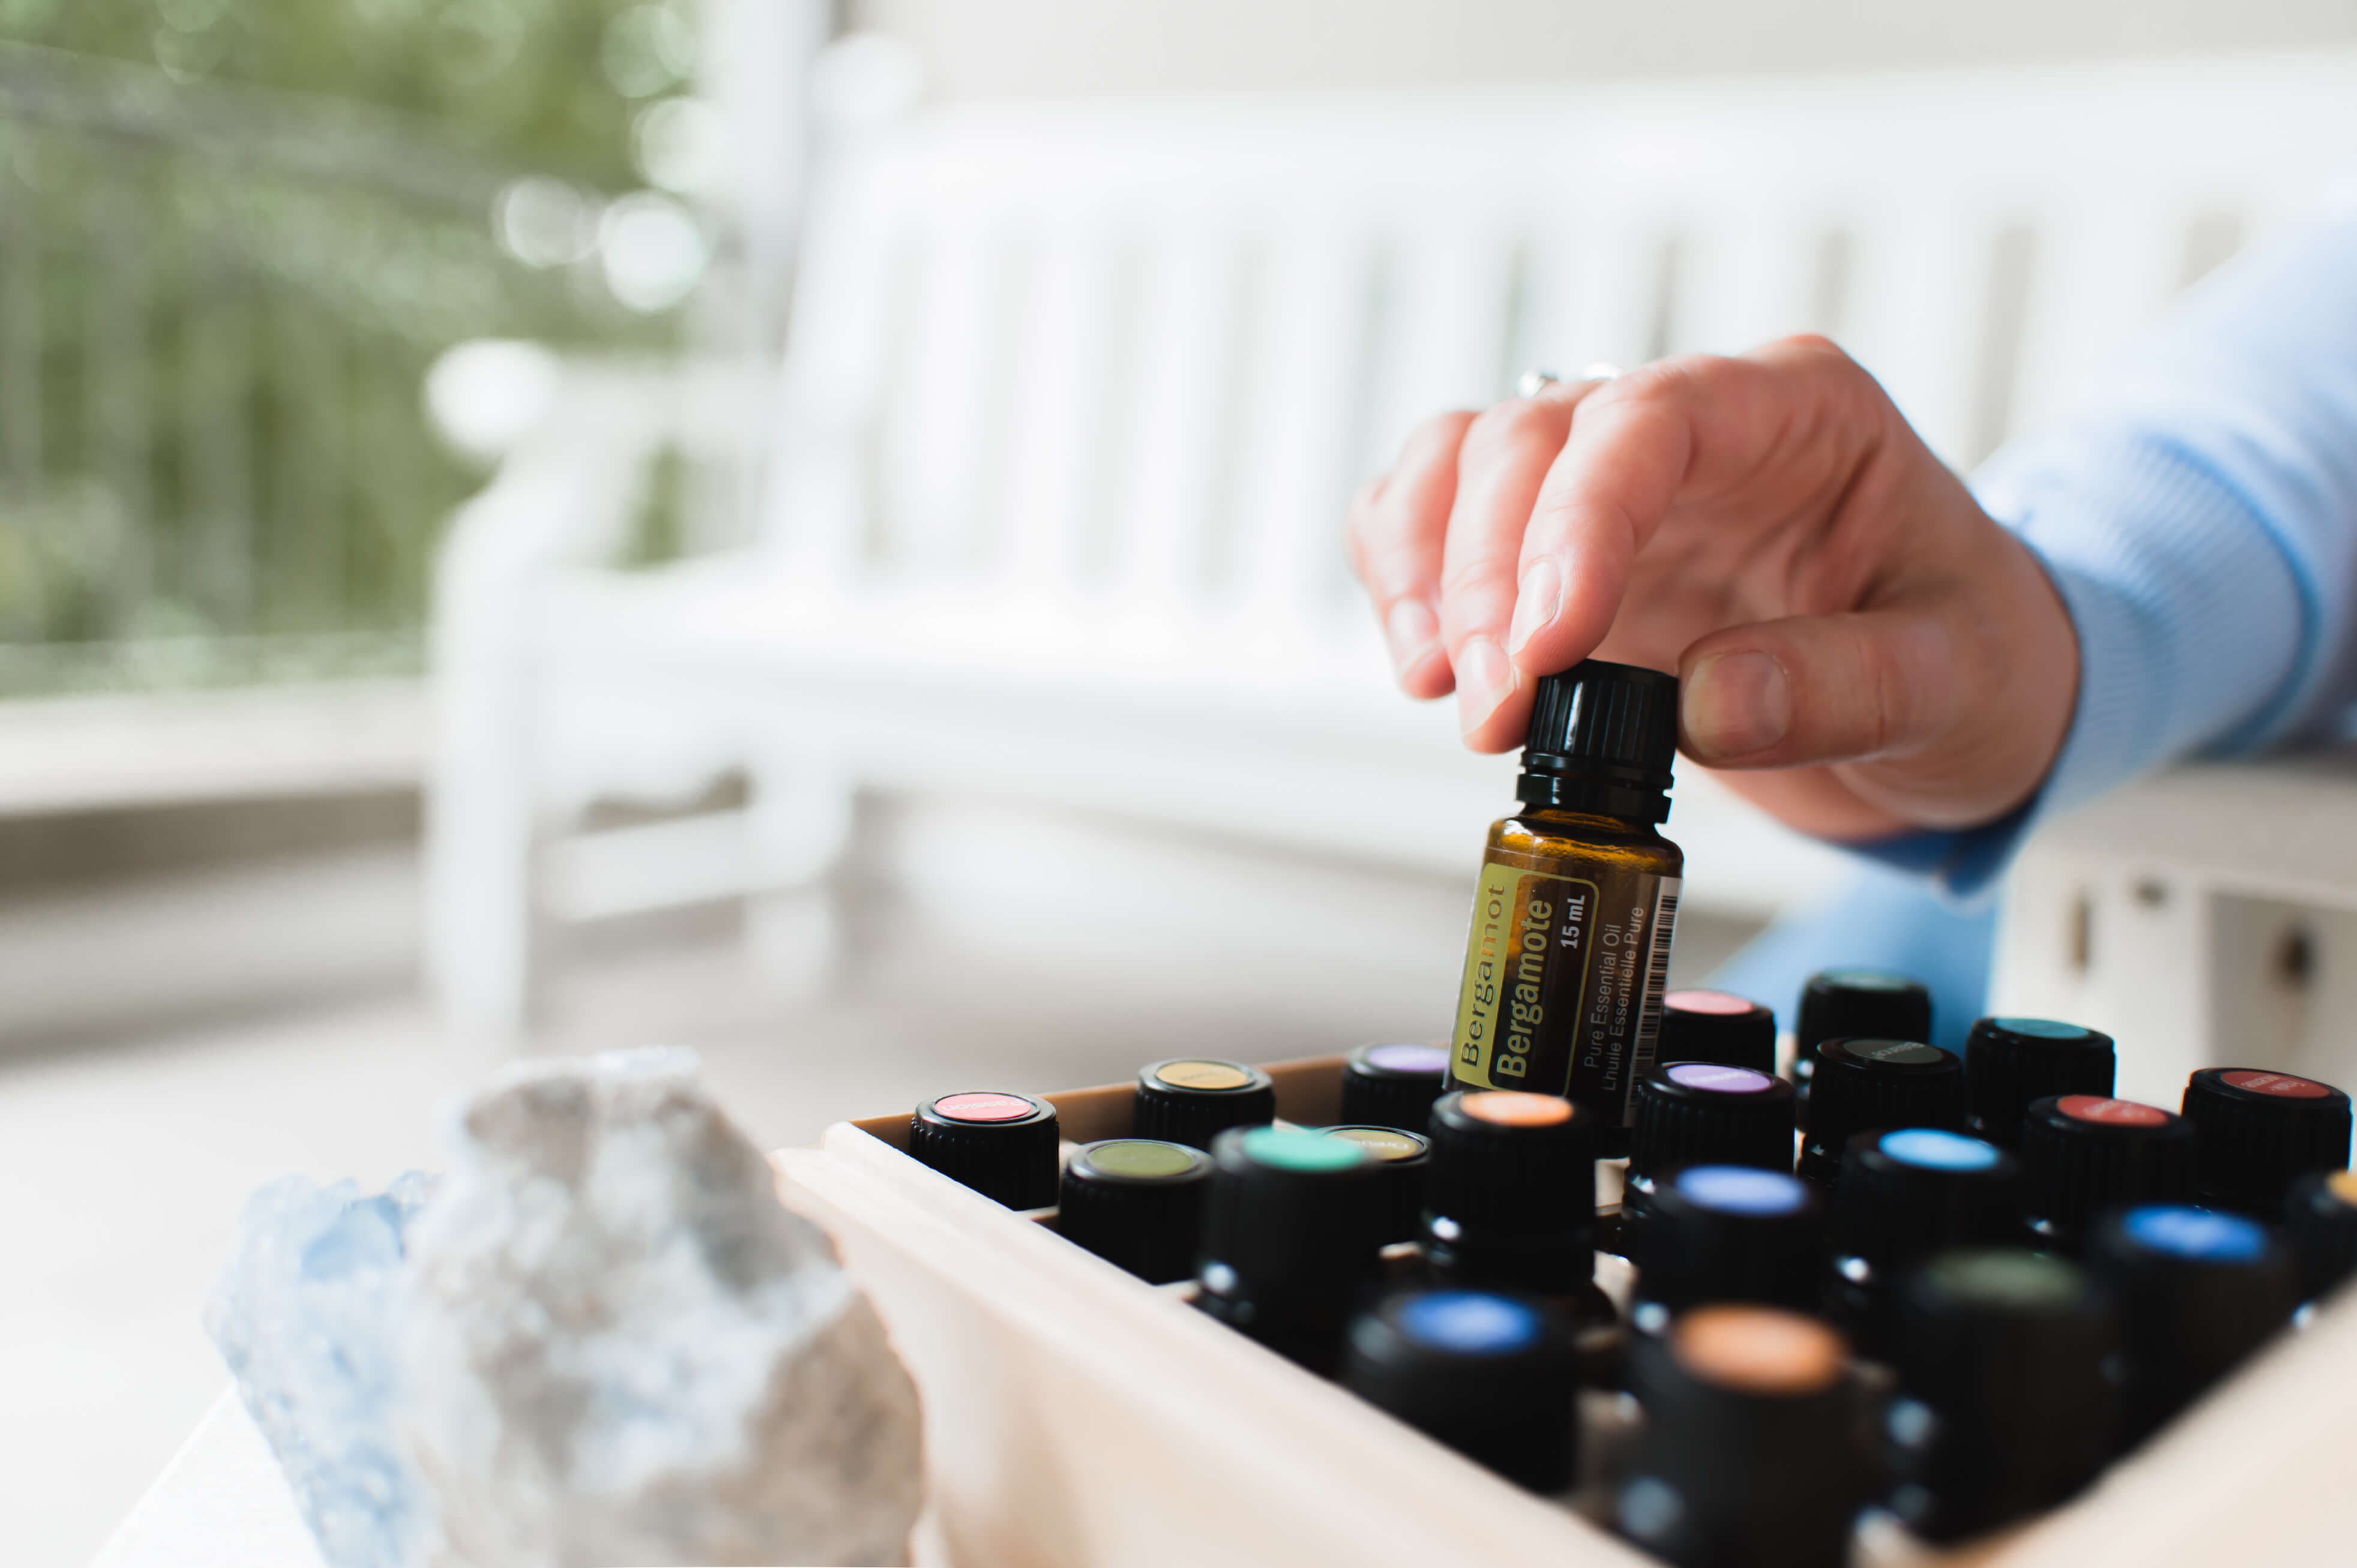 Let me help you discover the best essential oils from doTERRA to support your well-being, body, mind, and spirit.